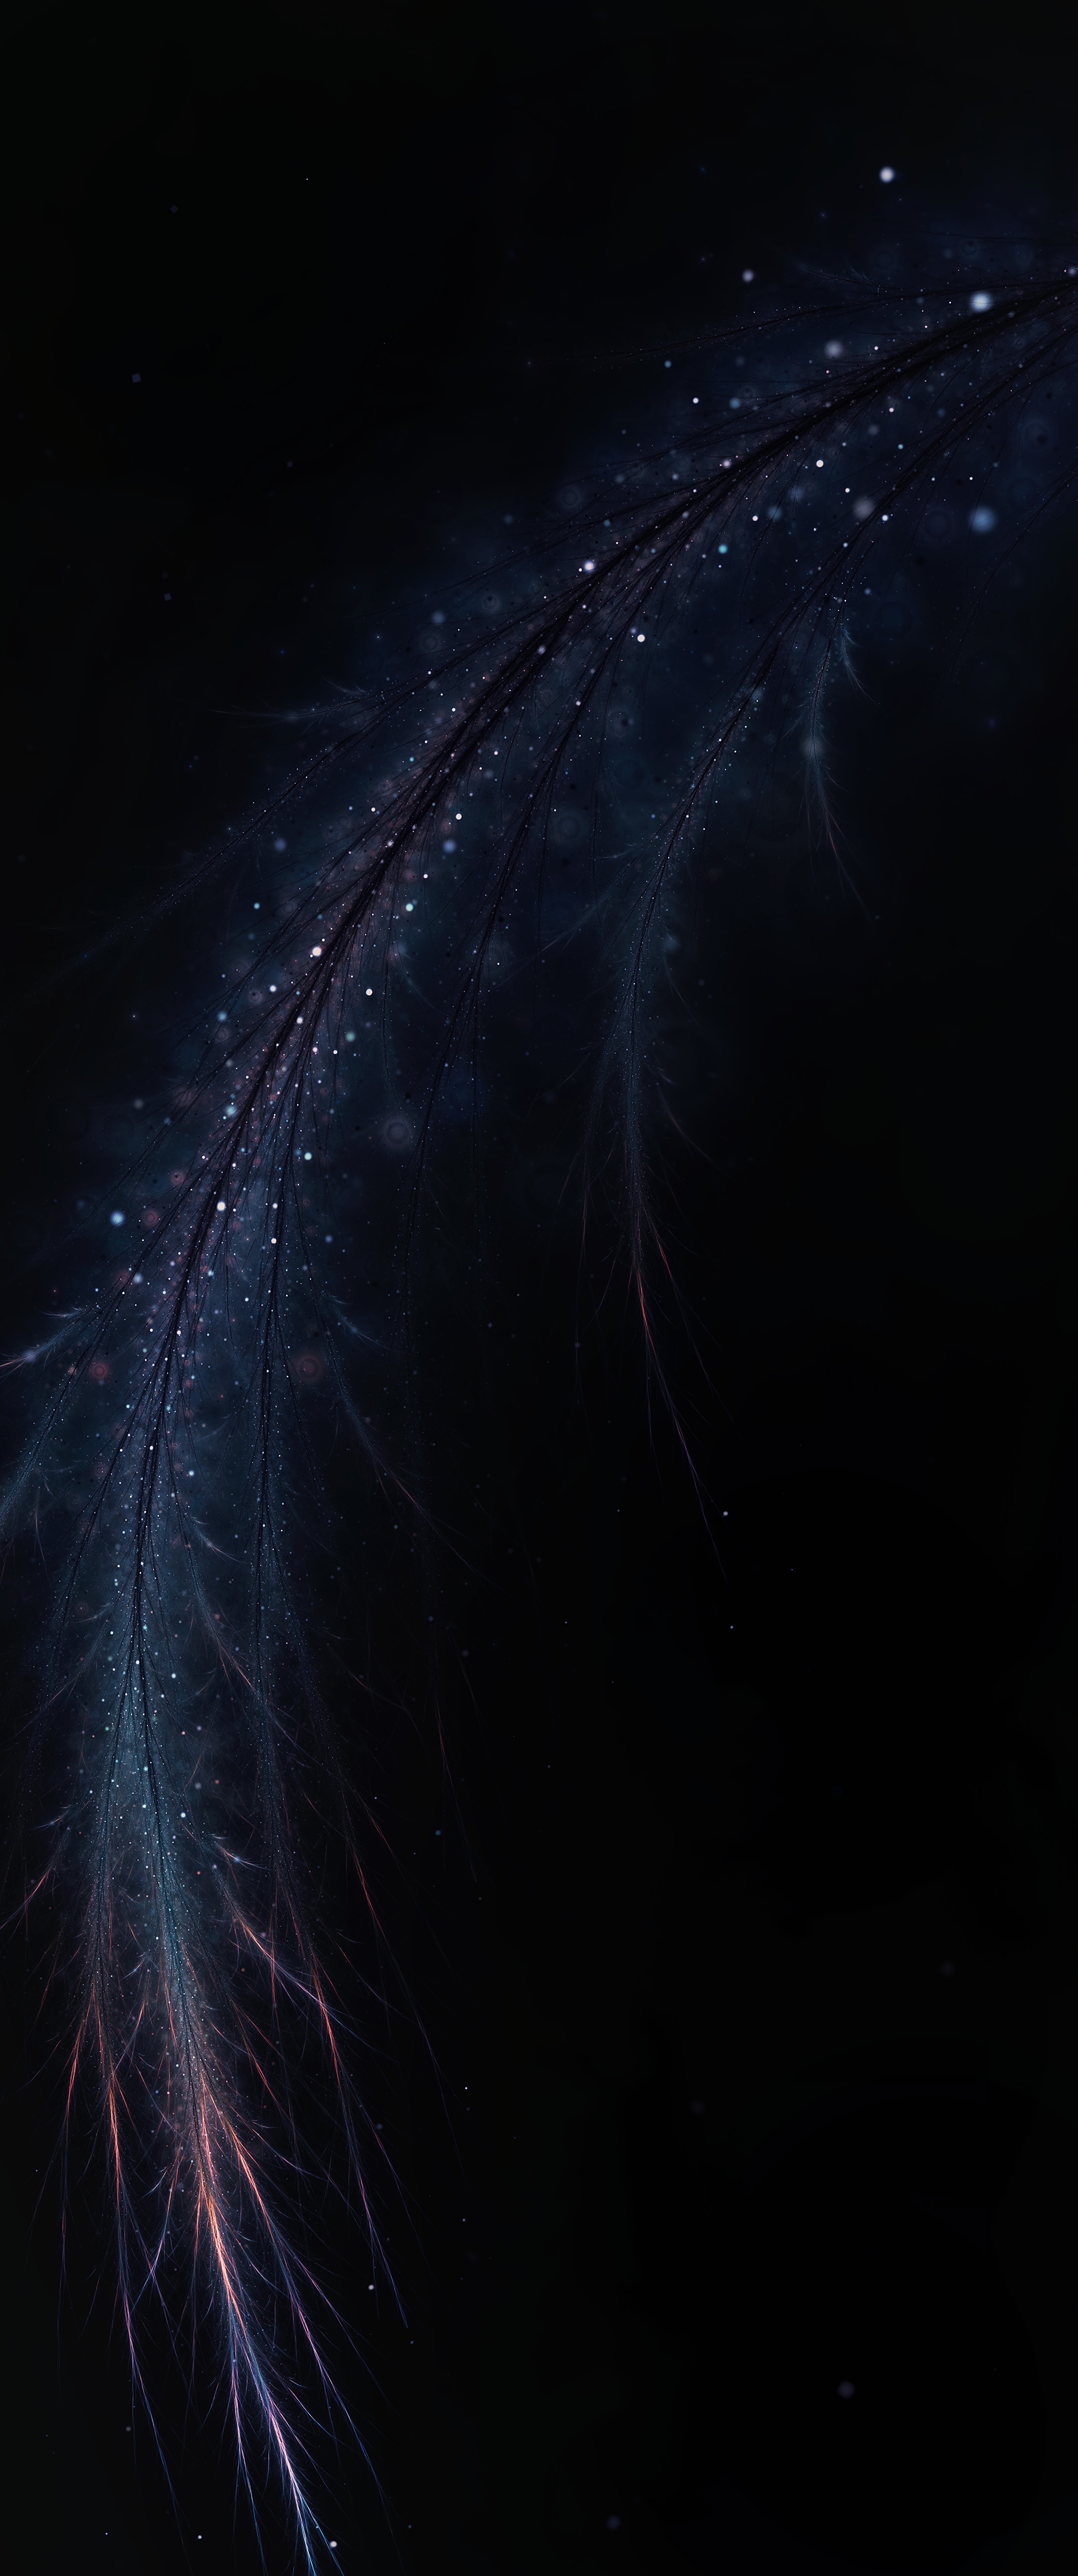 brilliance, pen, feather, dark, abstract, branch, fractal, shine Aesthetic wallpaper